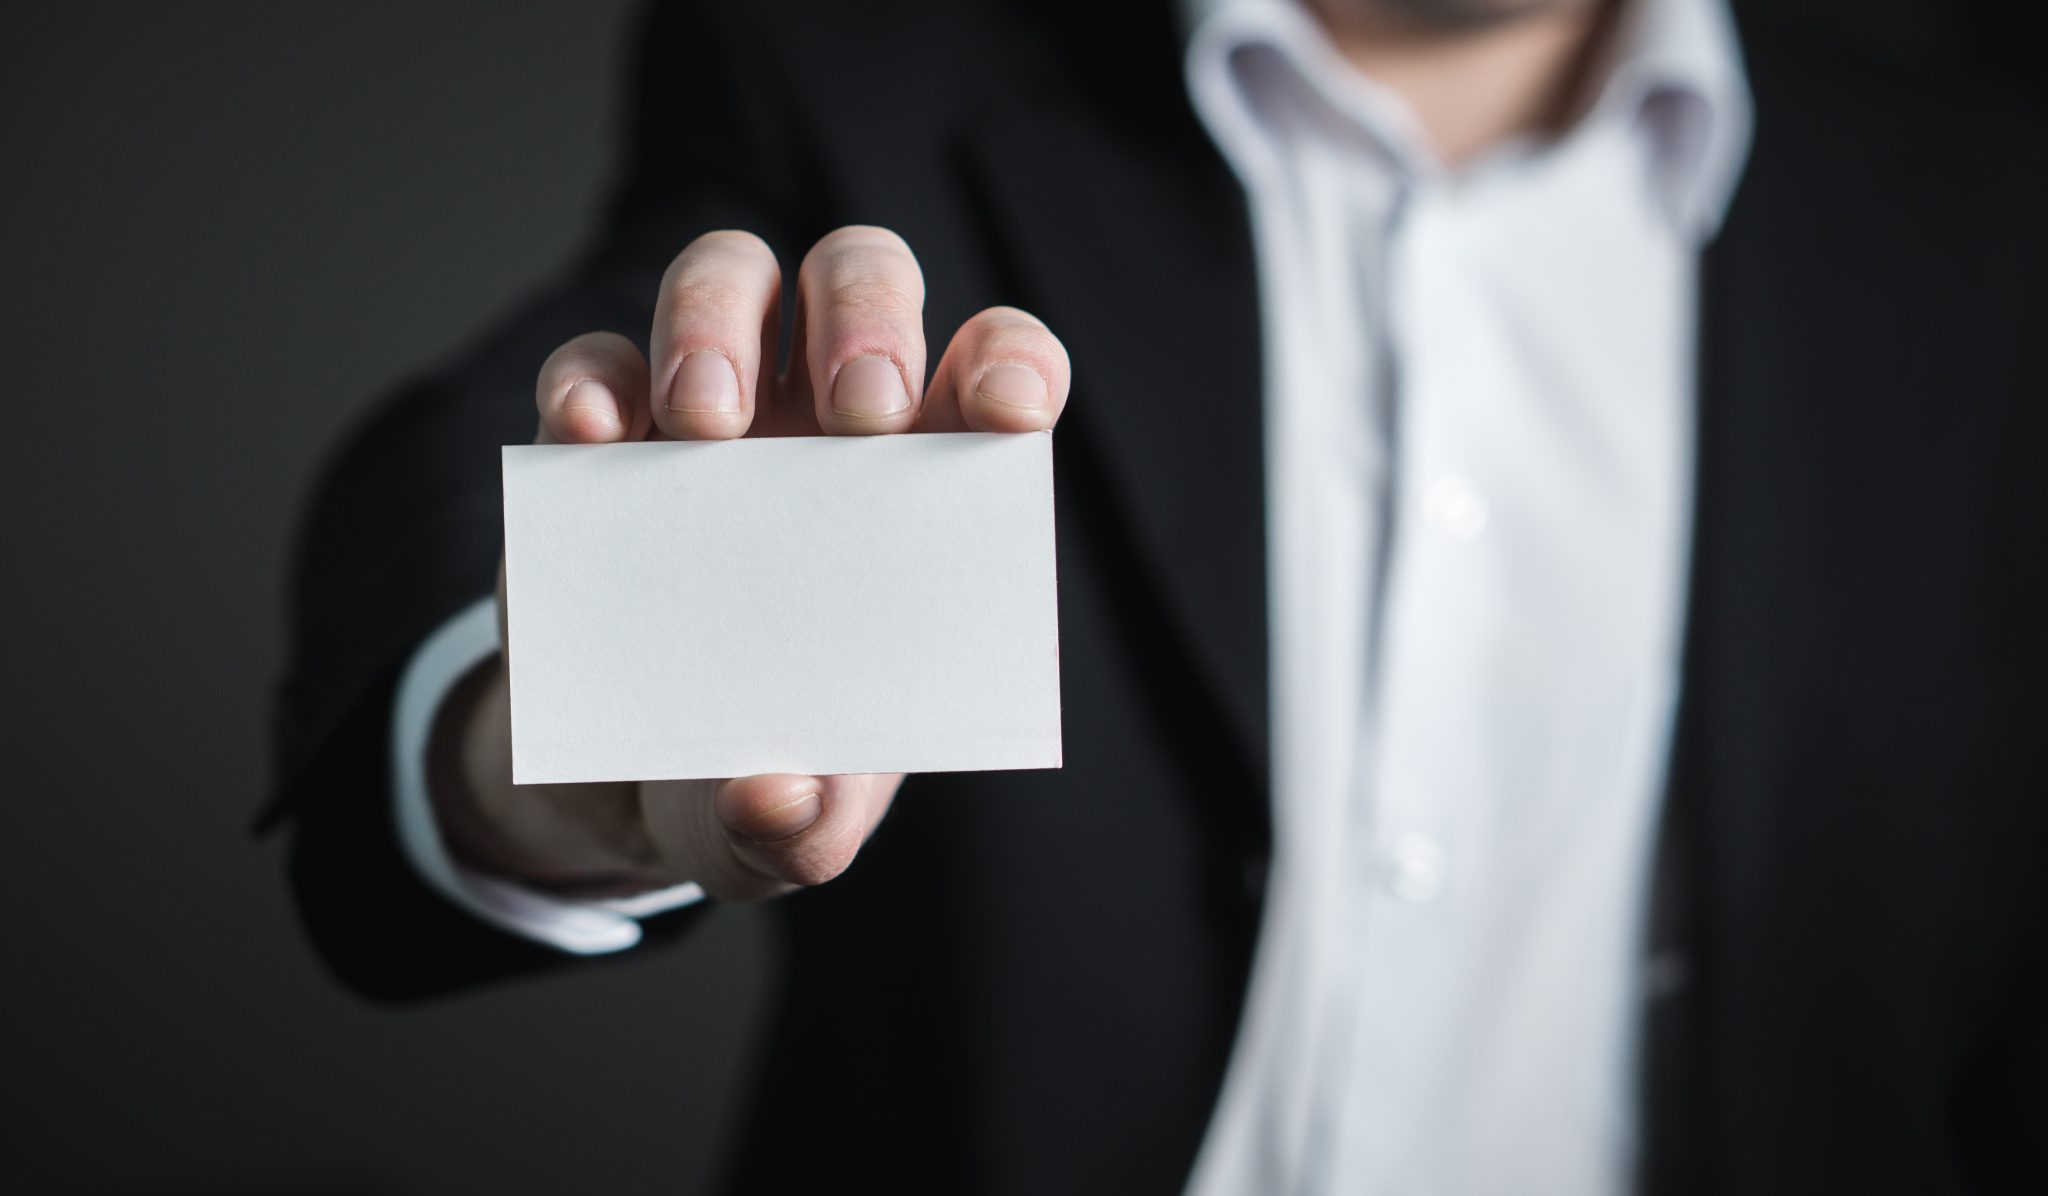 Mnan holding a blank business card